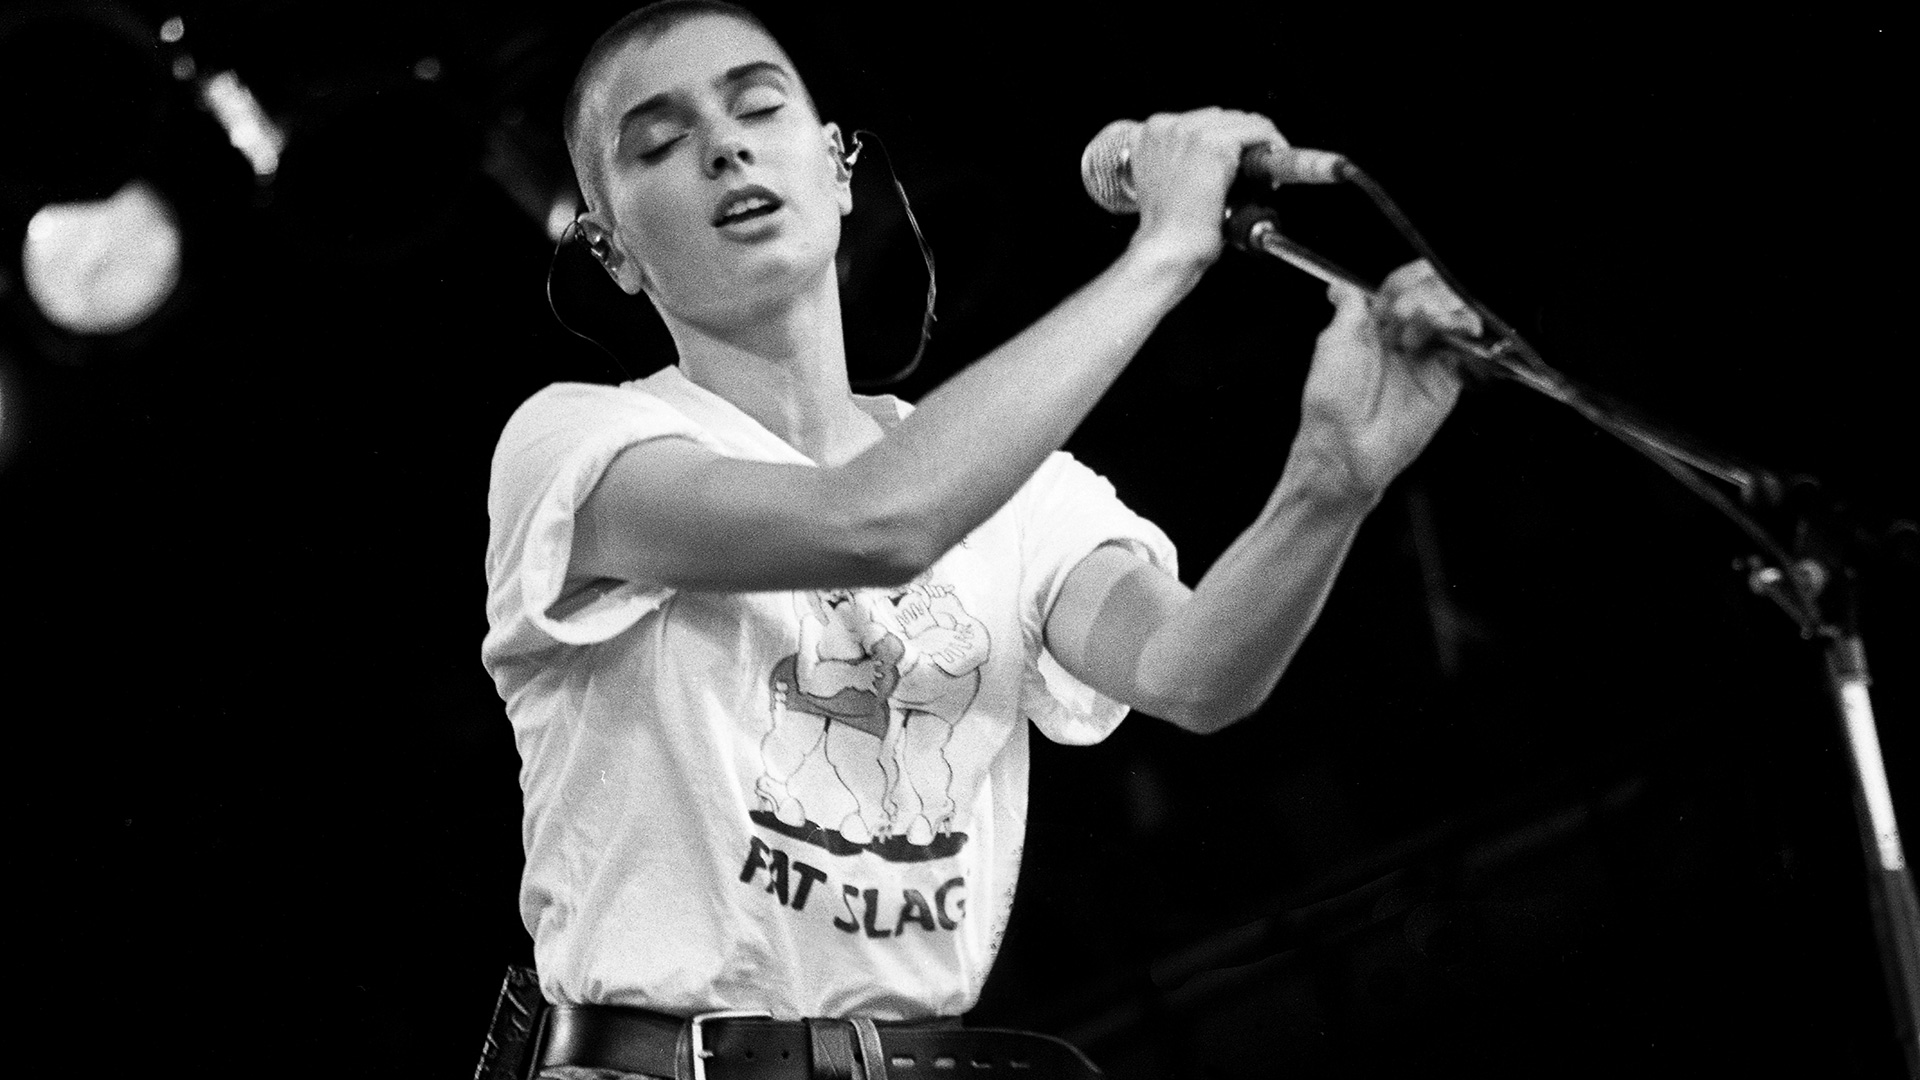 April 21, 1990: Sinead O'Connor’s "Nothing Compares 2 U" Hit No. 1 on Billboard Hot 100